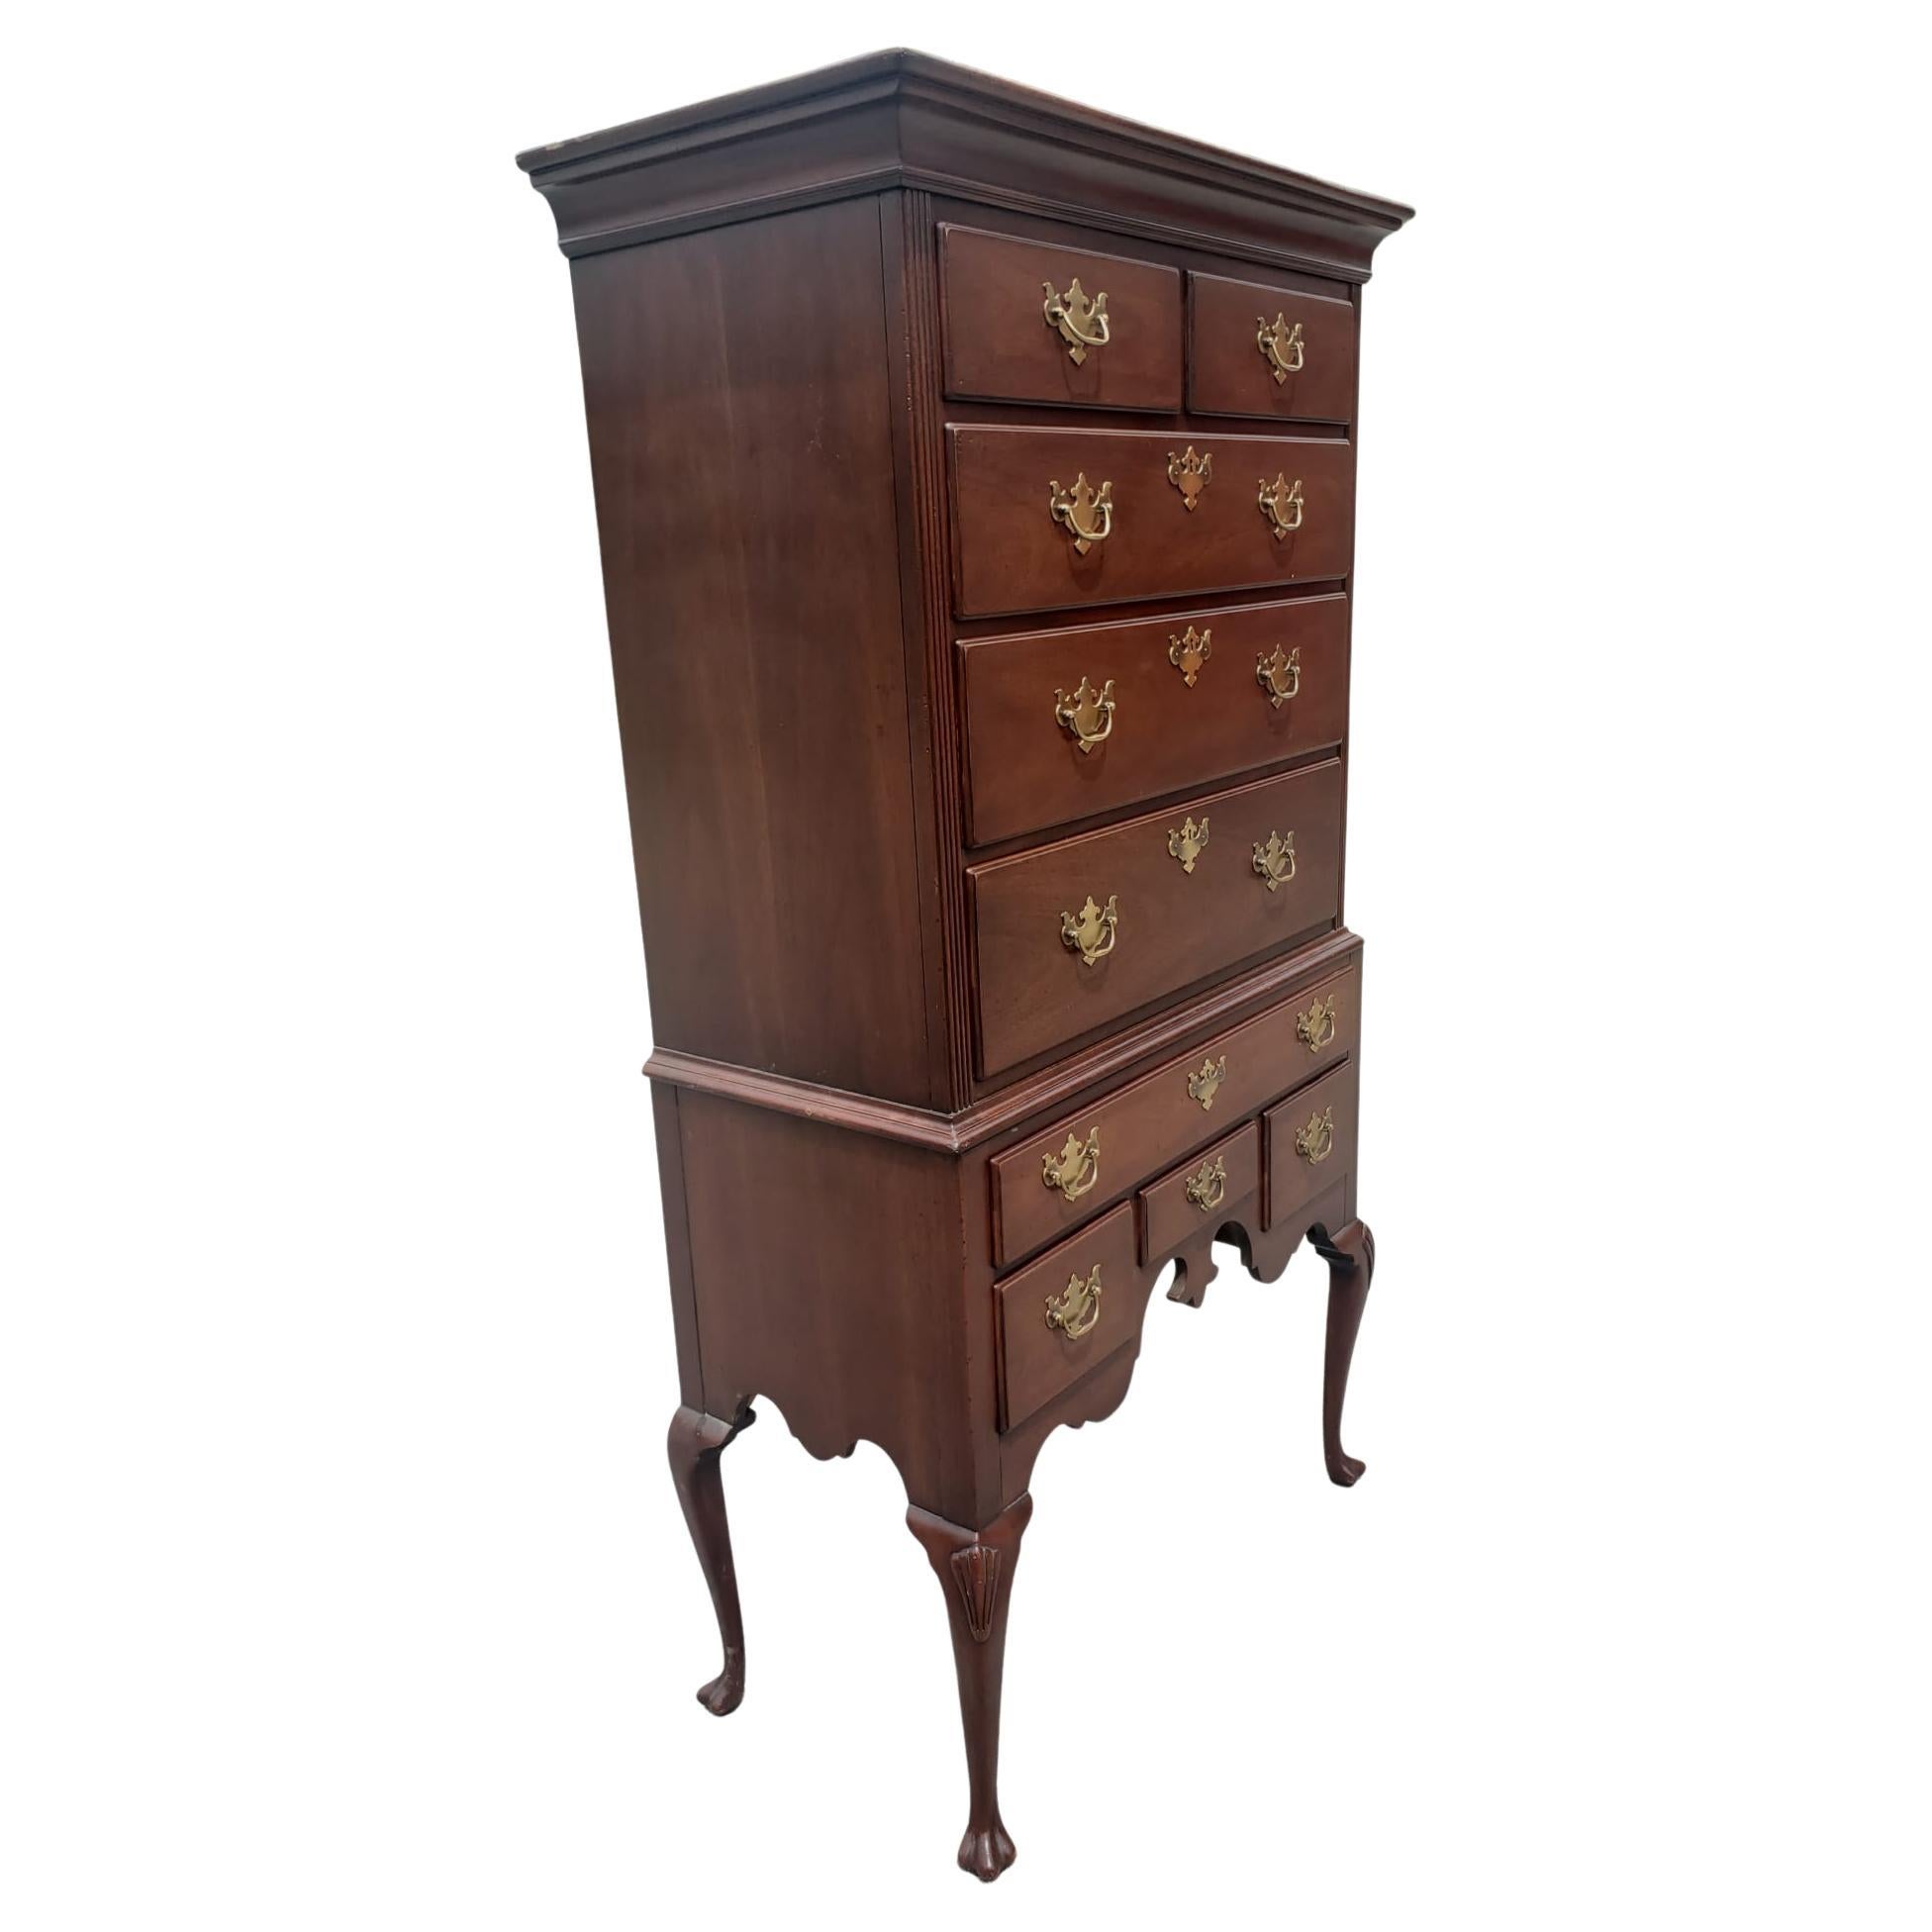 Hickory chair vintage mahogany chippendale style flat top highboy. Very good vintage condition. All dovetailed drawers opening and closing as originally intended. Measures 38.75 inches in width, 19.75 inches in depth and stand 72.25 inches tall.